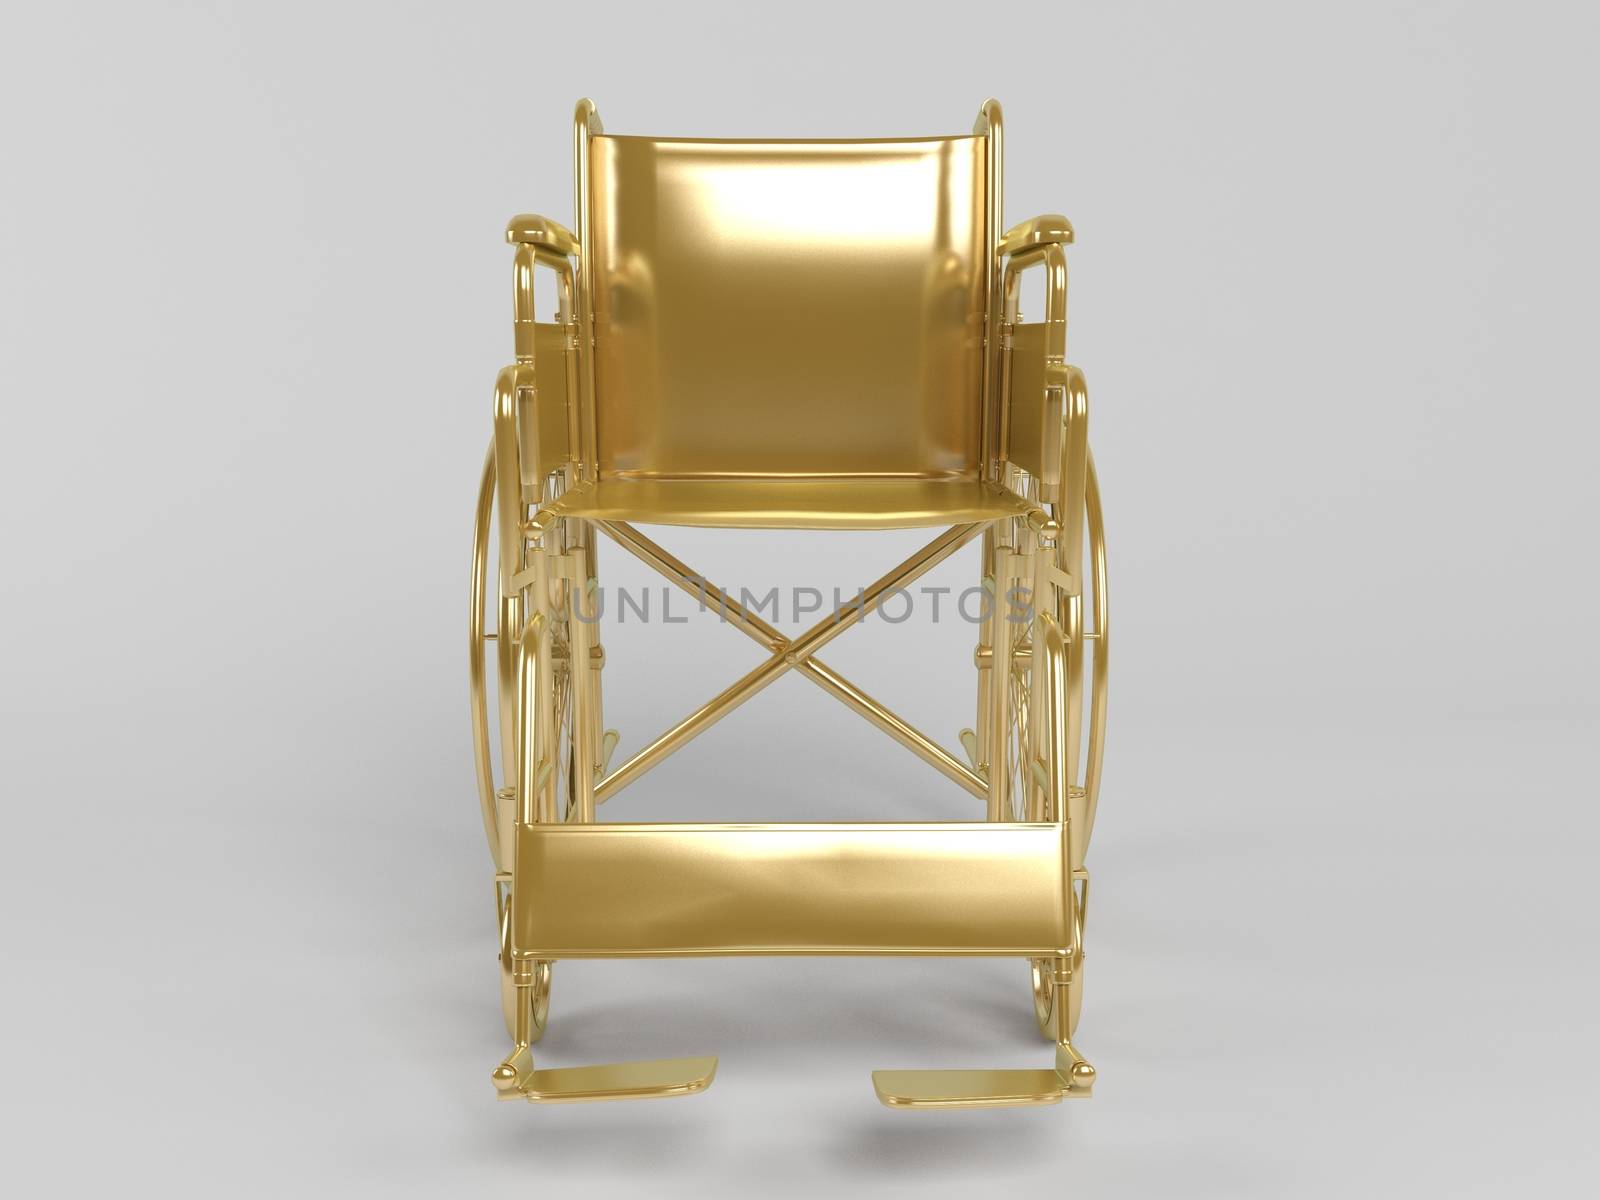 golden 3d object isolated on white by fares139